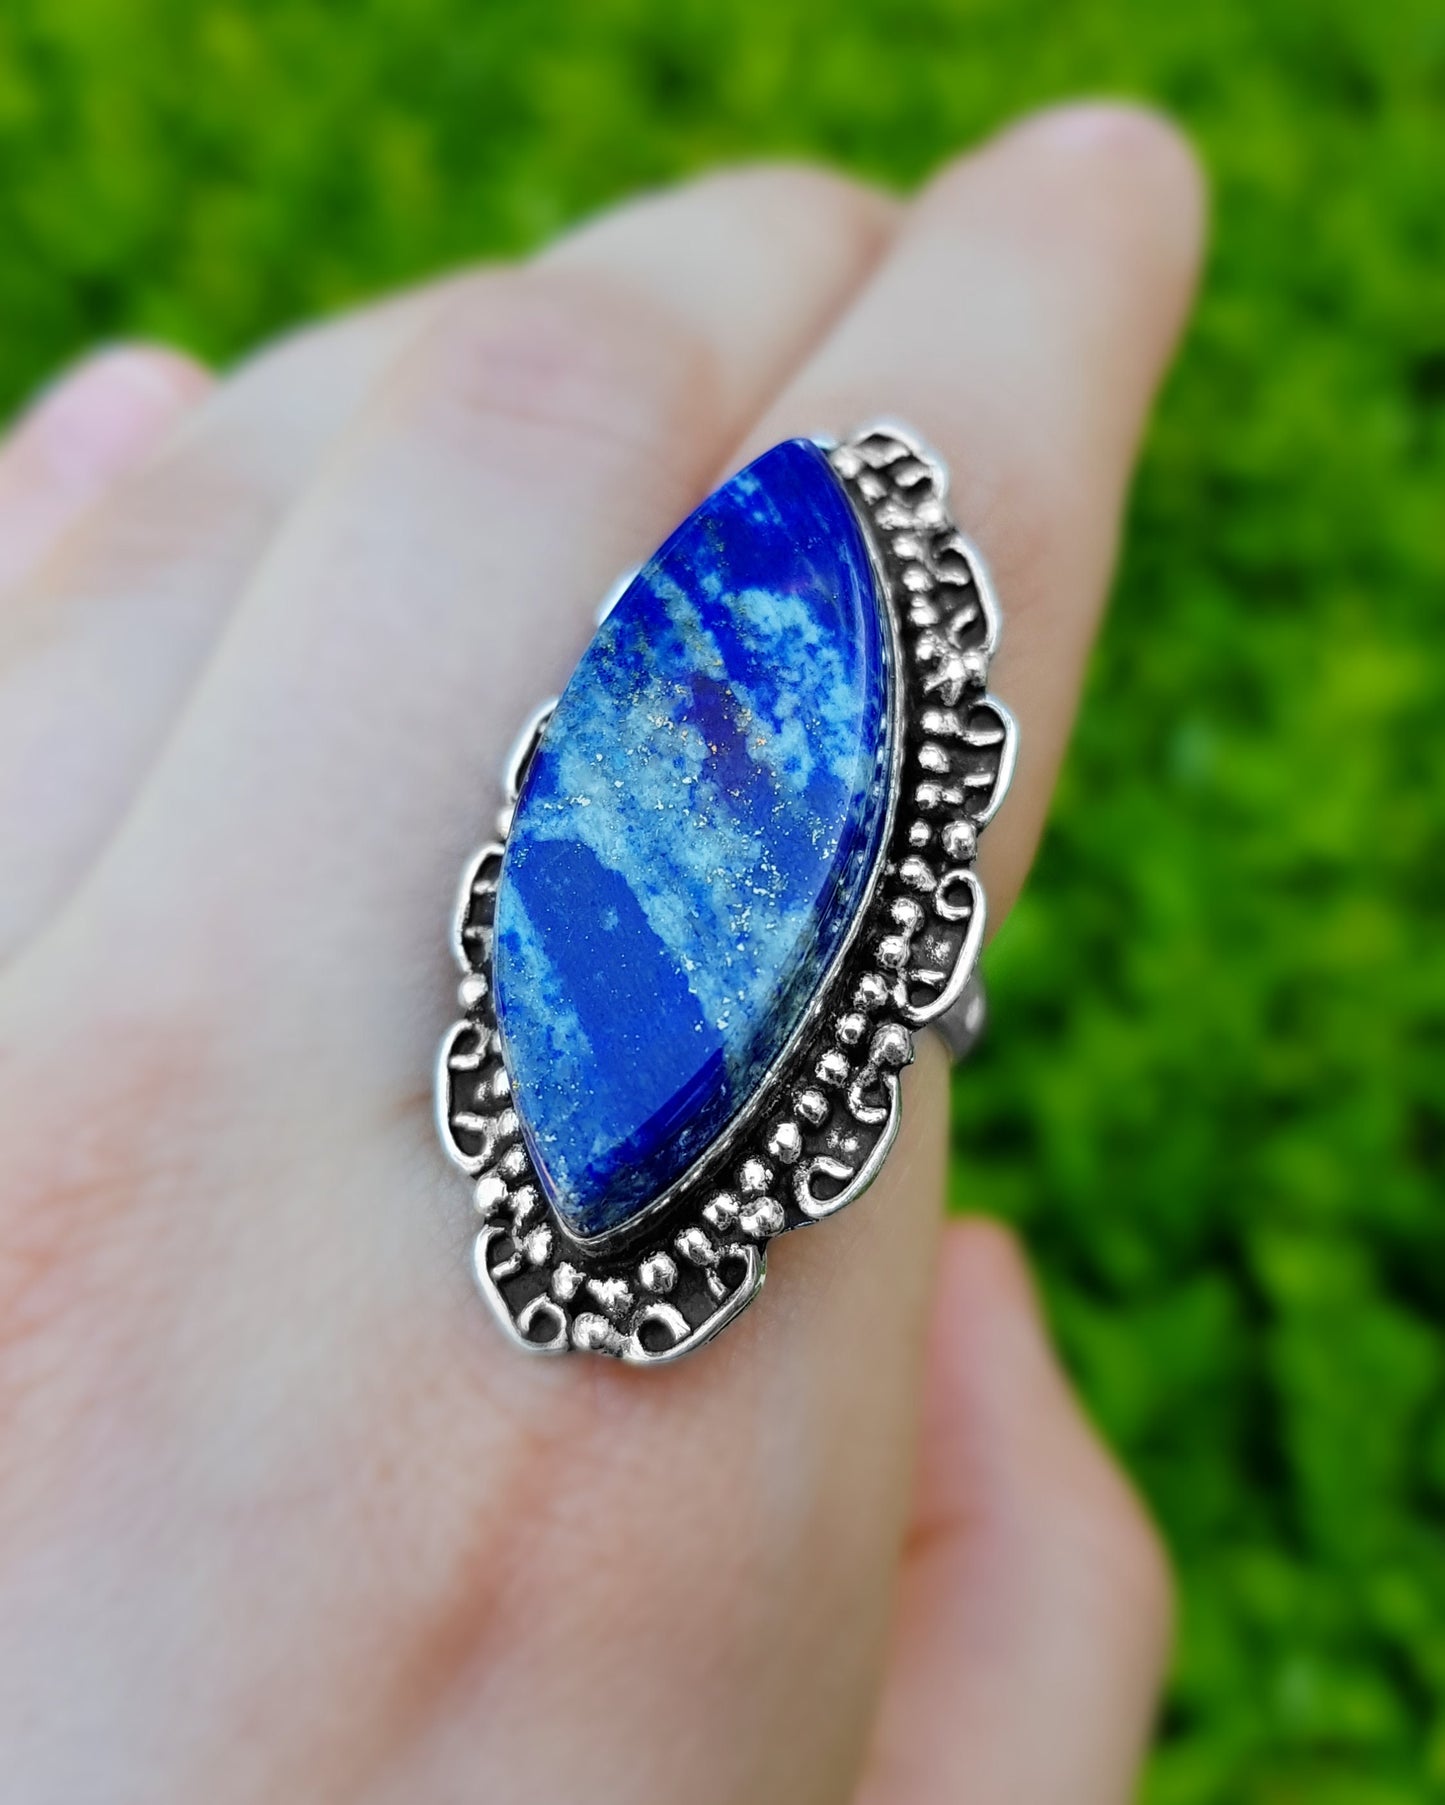 Lapis Lazuli Ring In Sterling Silver Size US 6 Big Statement Ring Boho Crystal Rings GypsyJewelry Unique Gift For Women